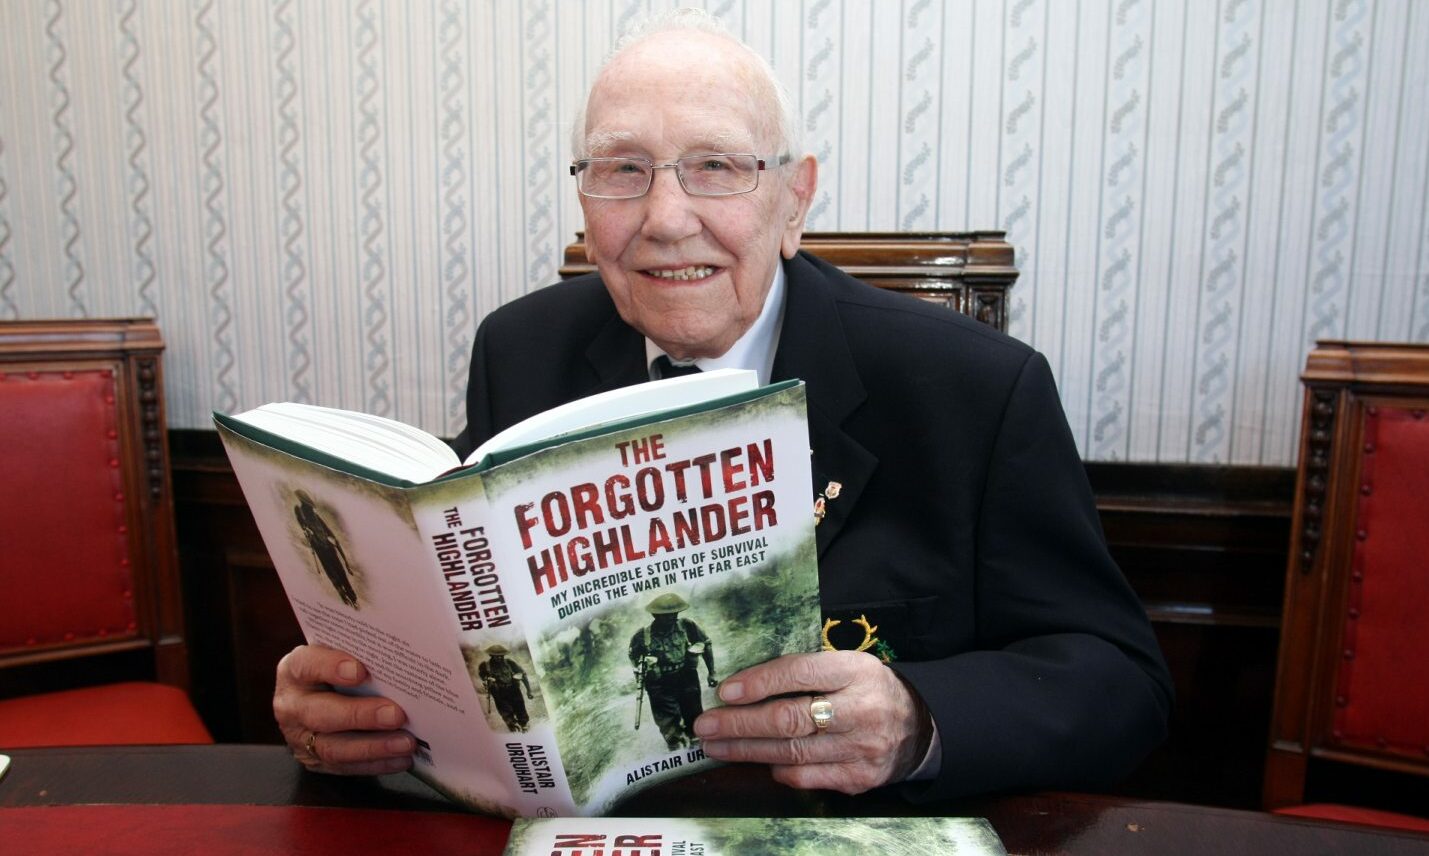 Alistair Urquhart wrote The Forgotten Highlander in 2011, aged 92.